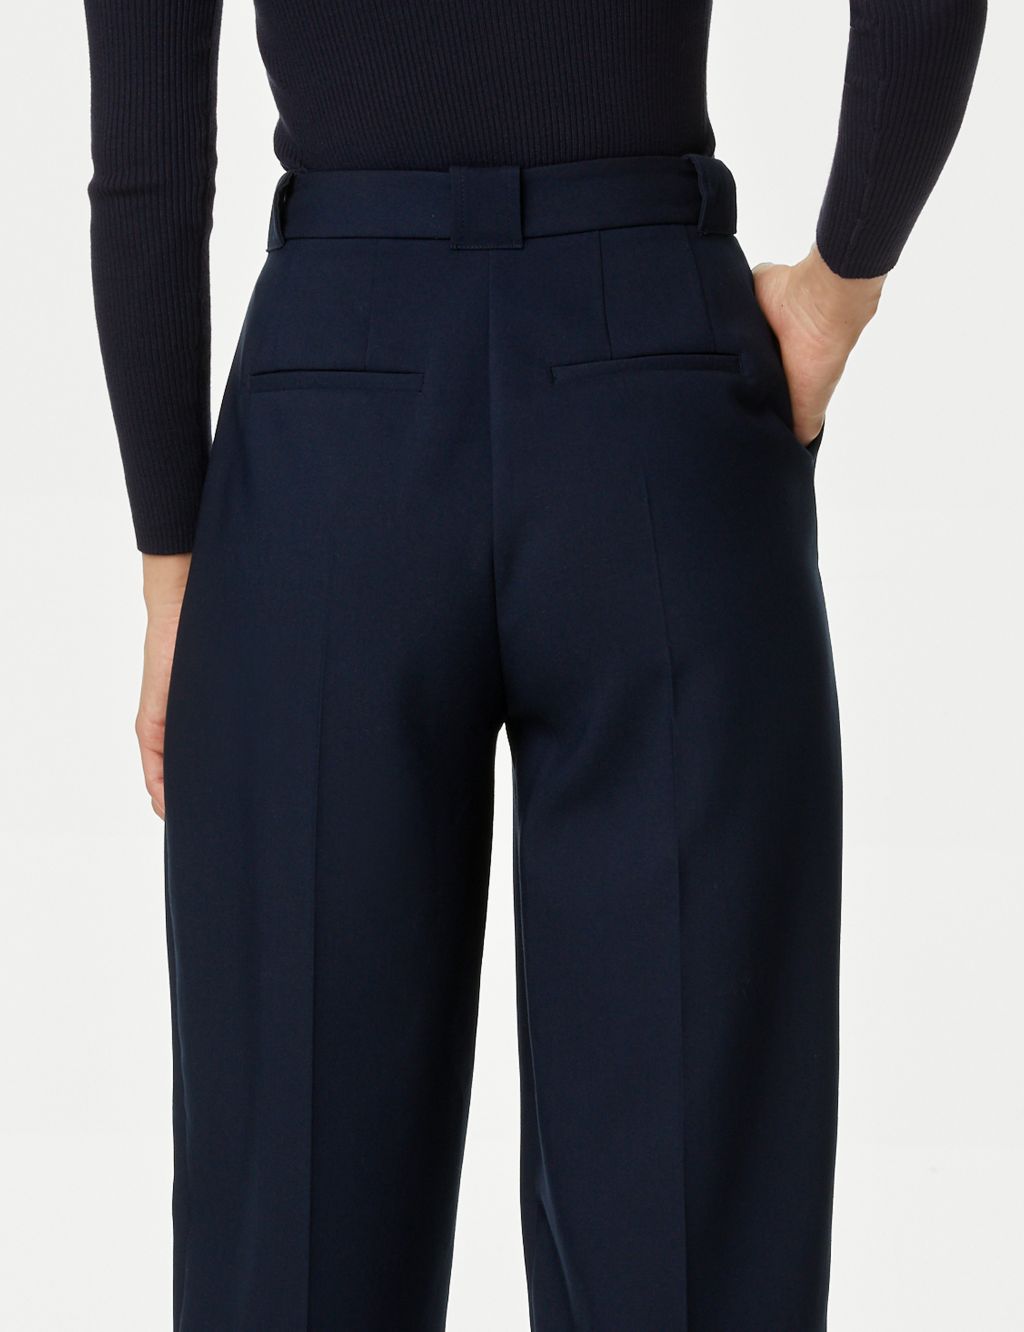 Pleat Front Relaxed Trousers image 4